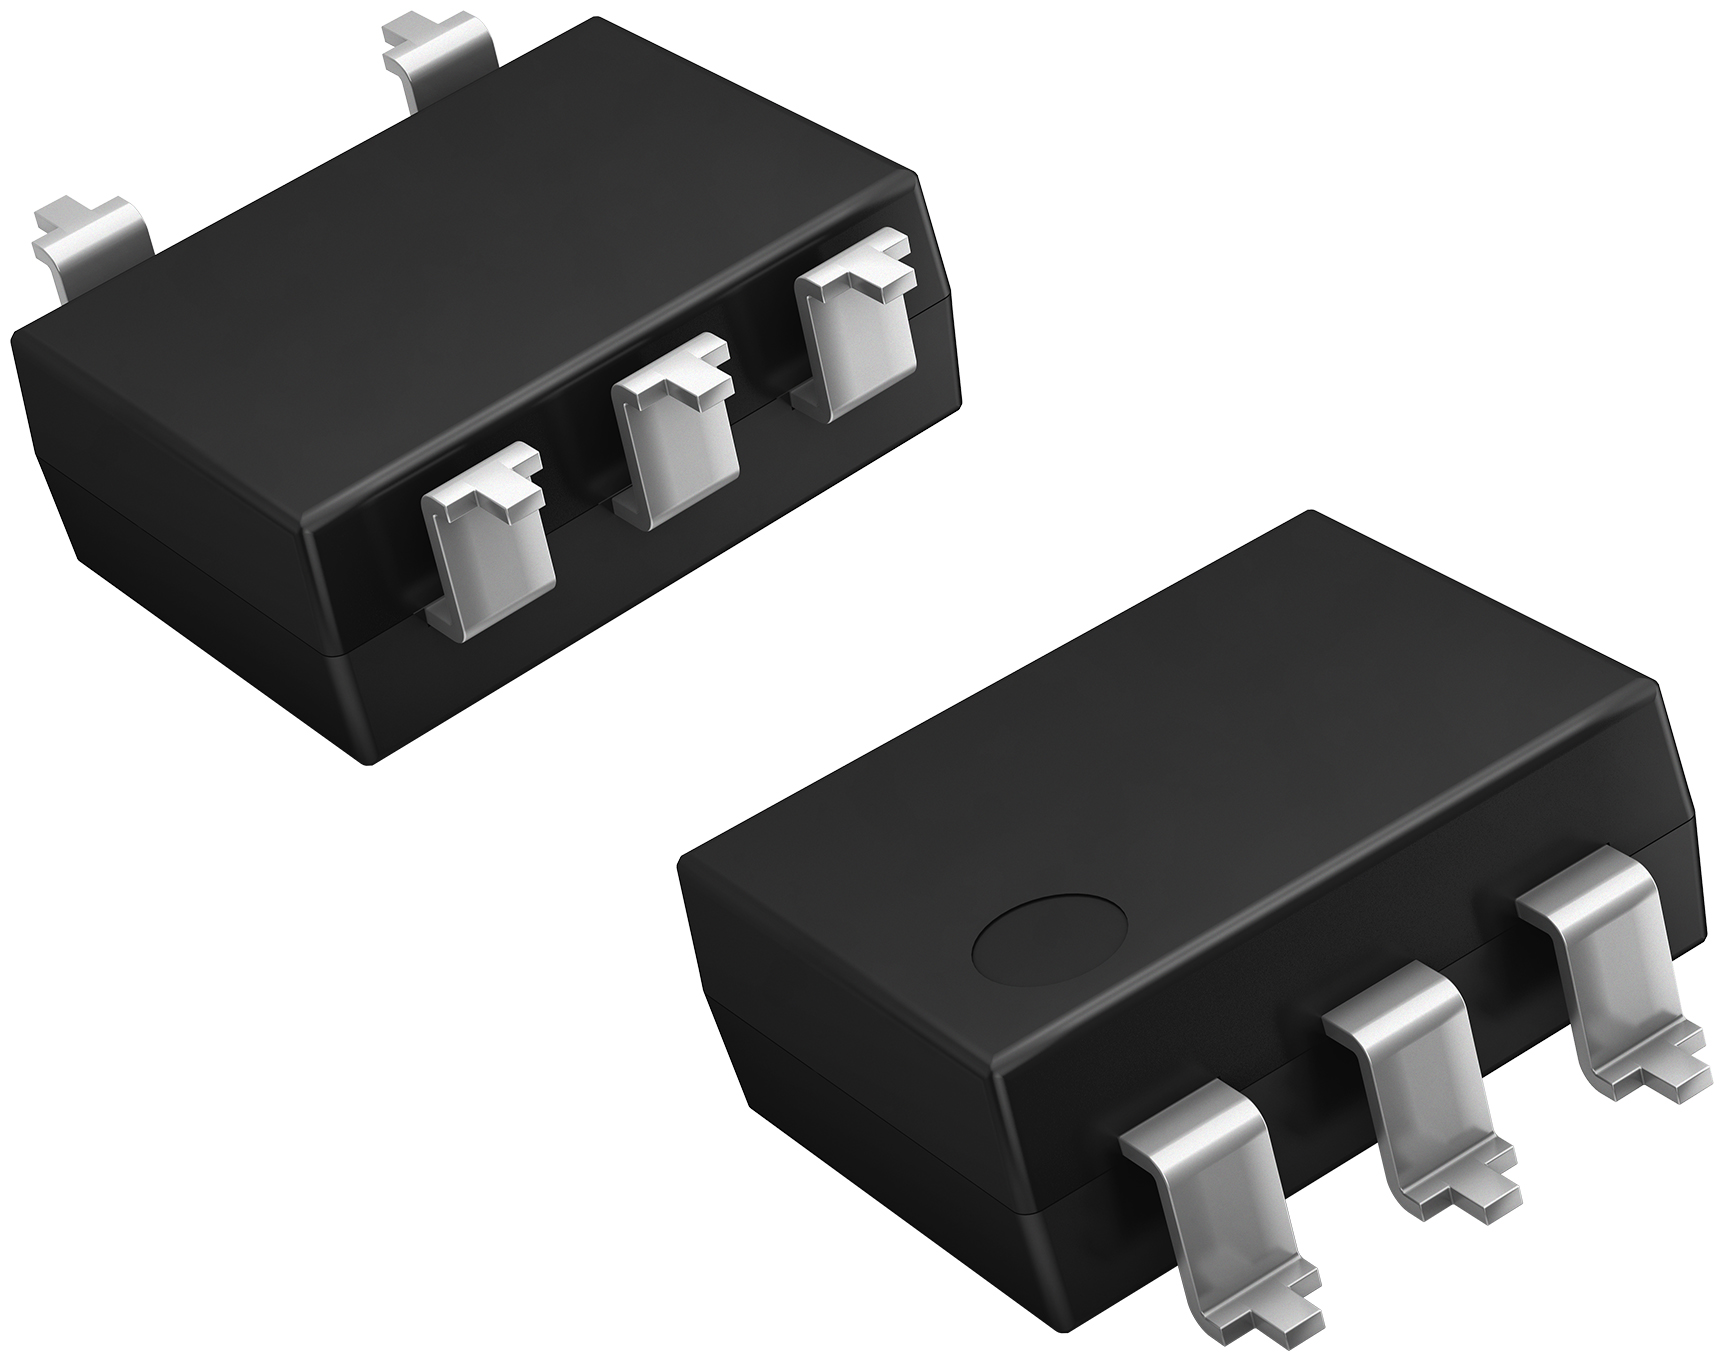 Miniature 1500V PhotoMOS relay meets the switching requirements of Battery Management Systems